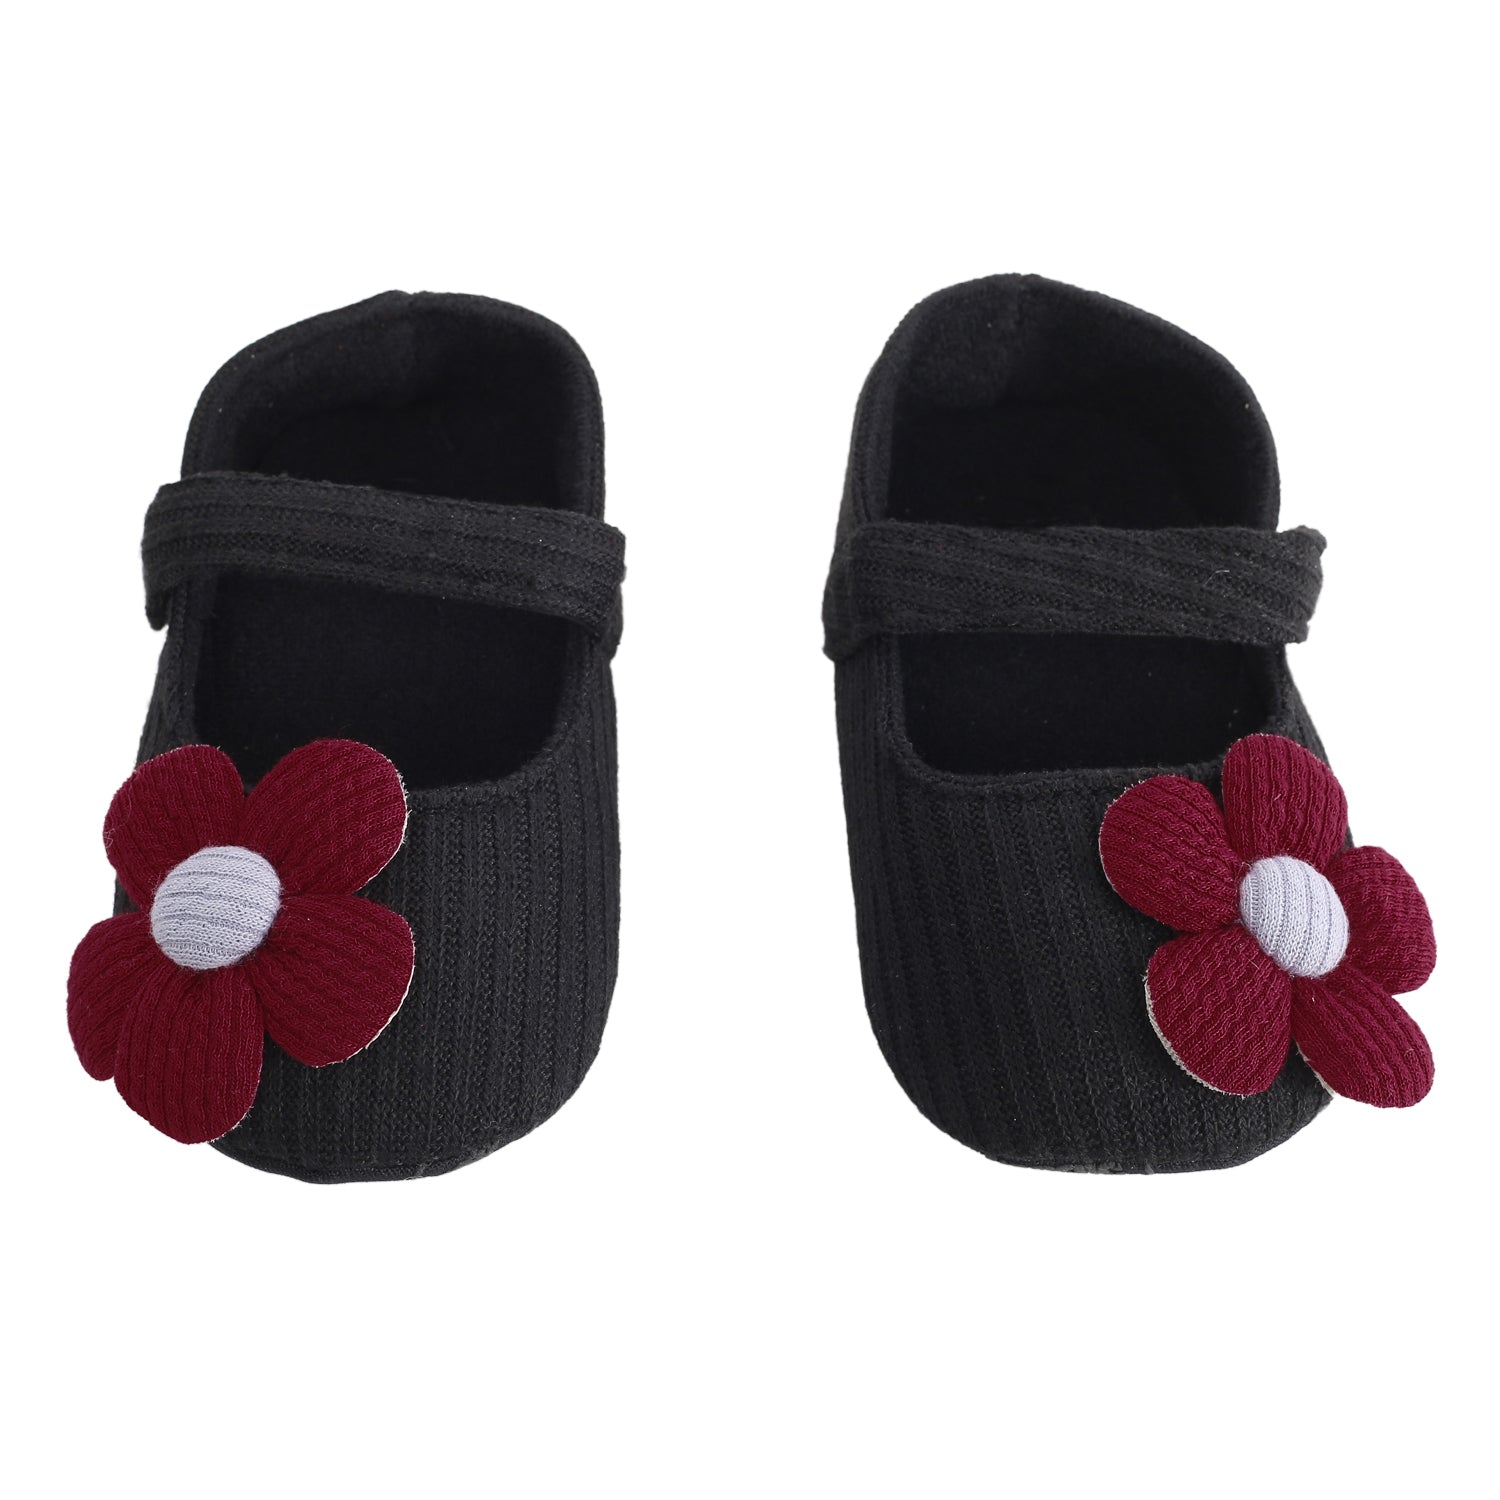 Floral Applique Black And Red Booties - Baby Moo